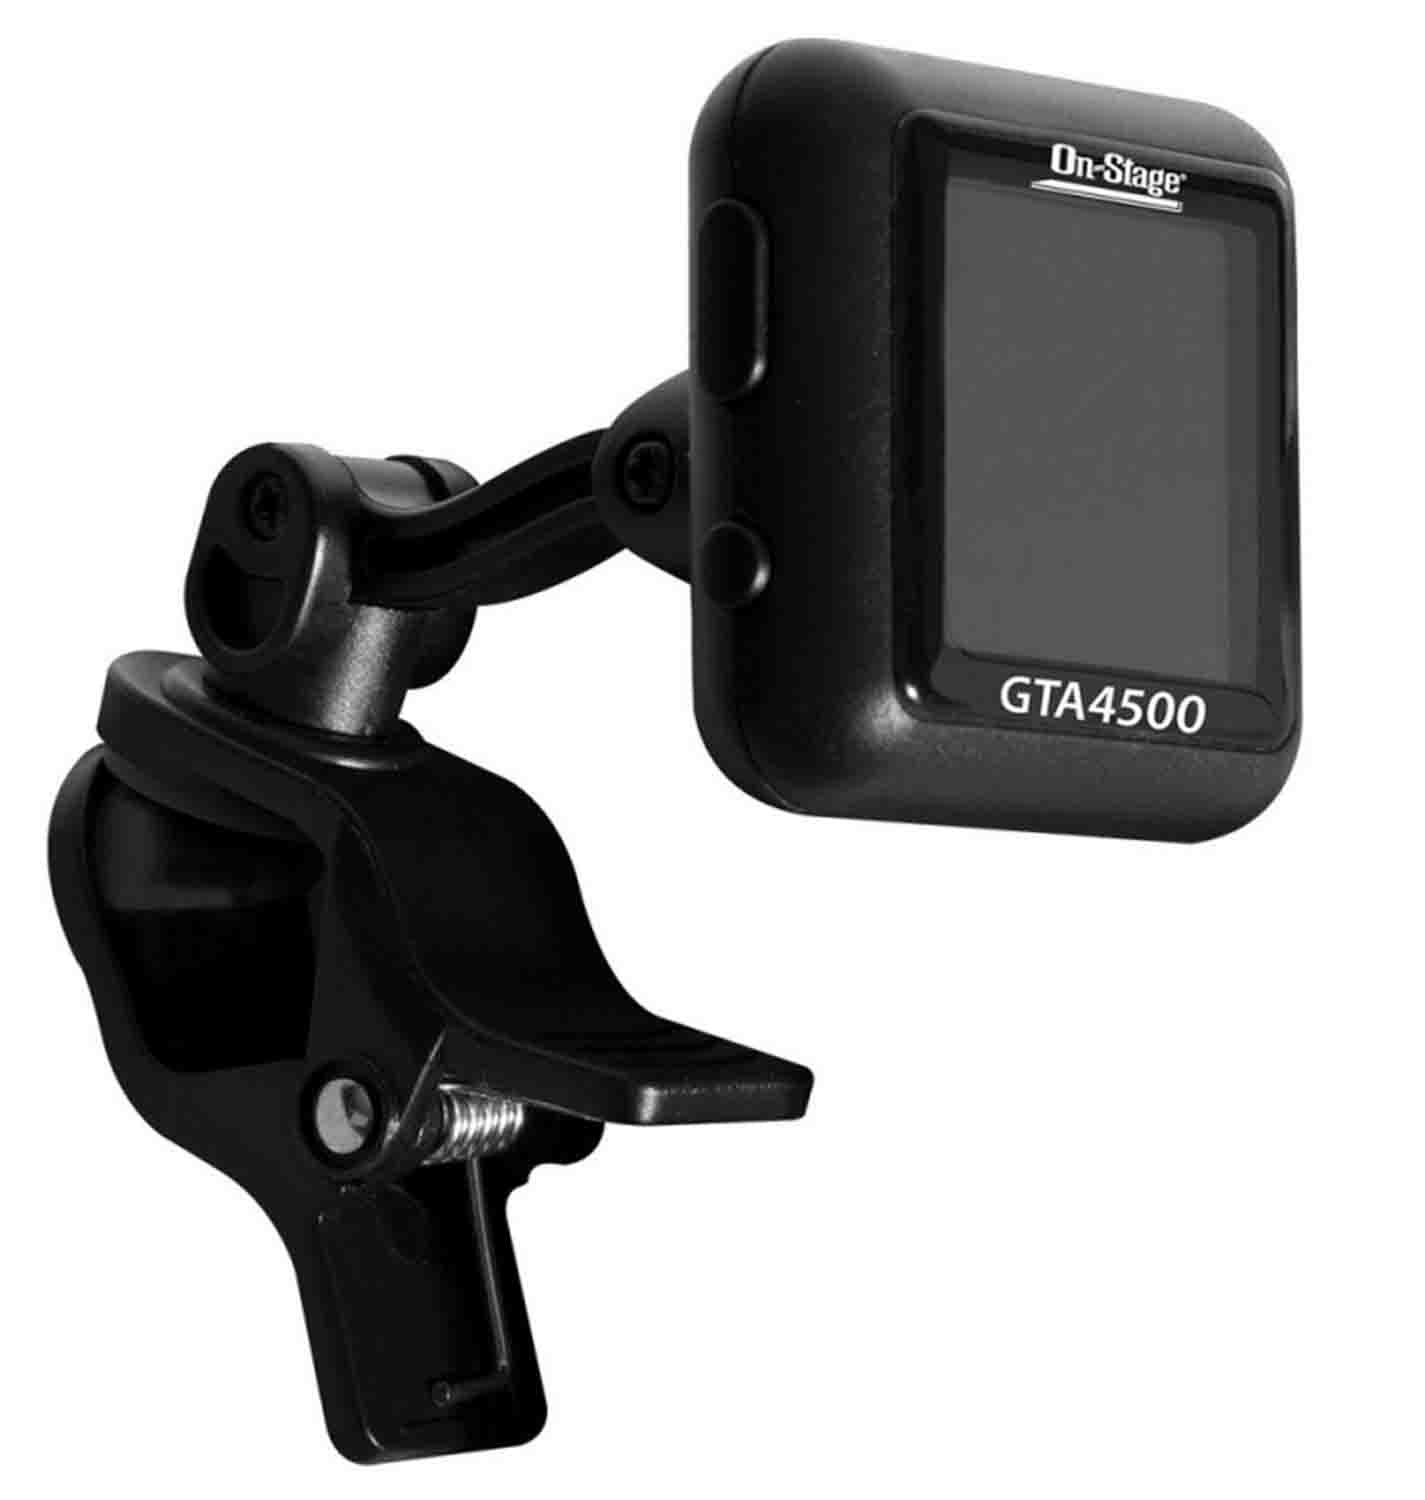 Onstage GTA4500 Rechargeable Clip-On Tuner - Black - Hollywood DJ